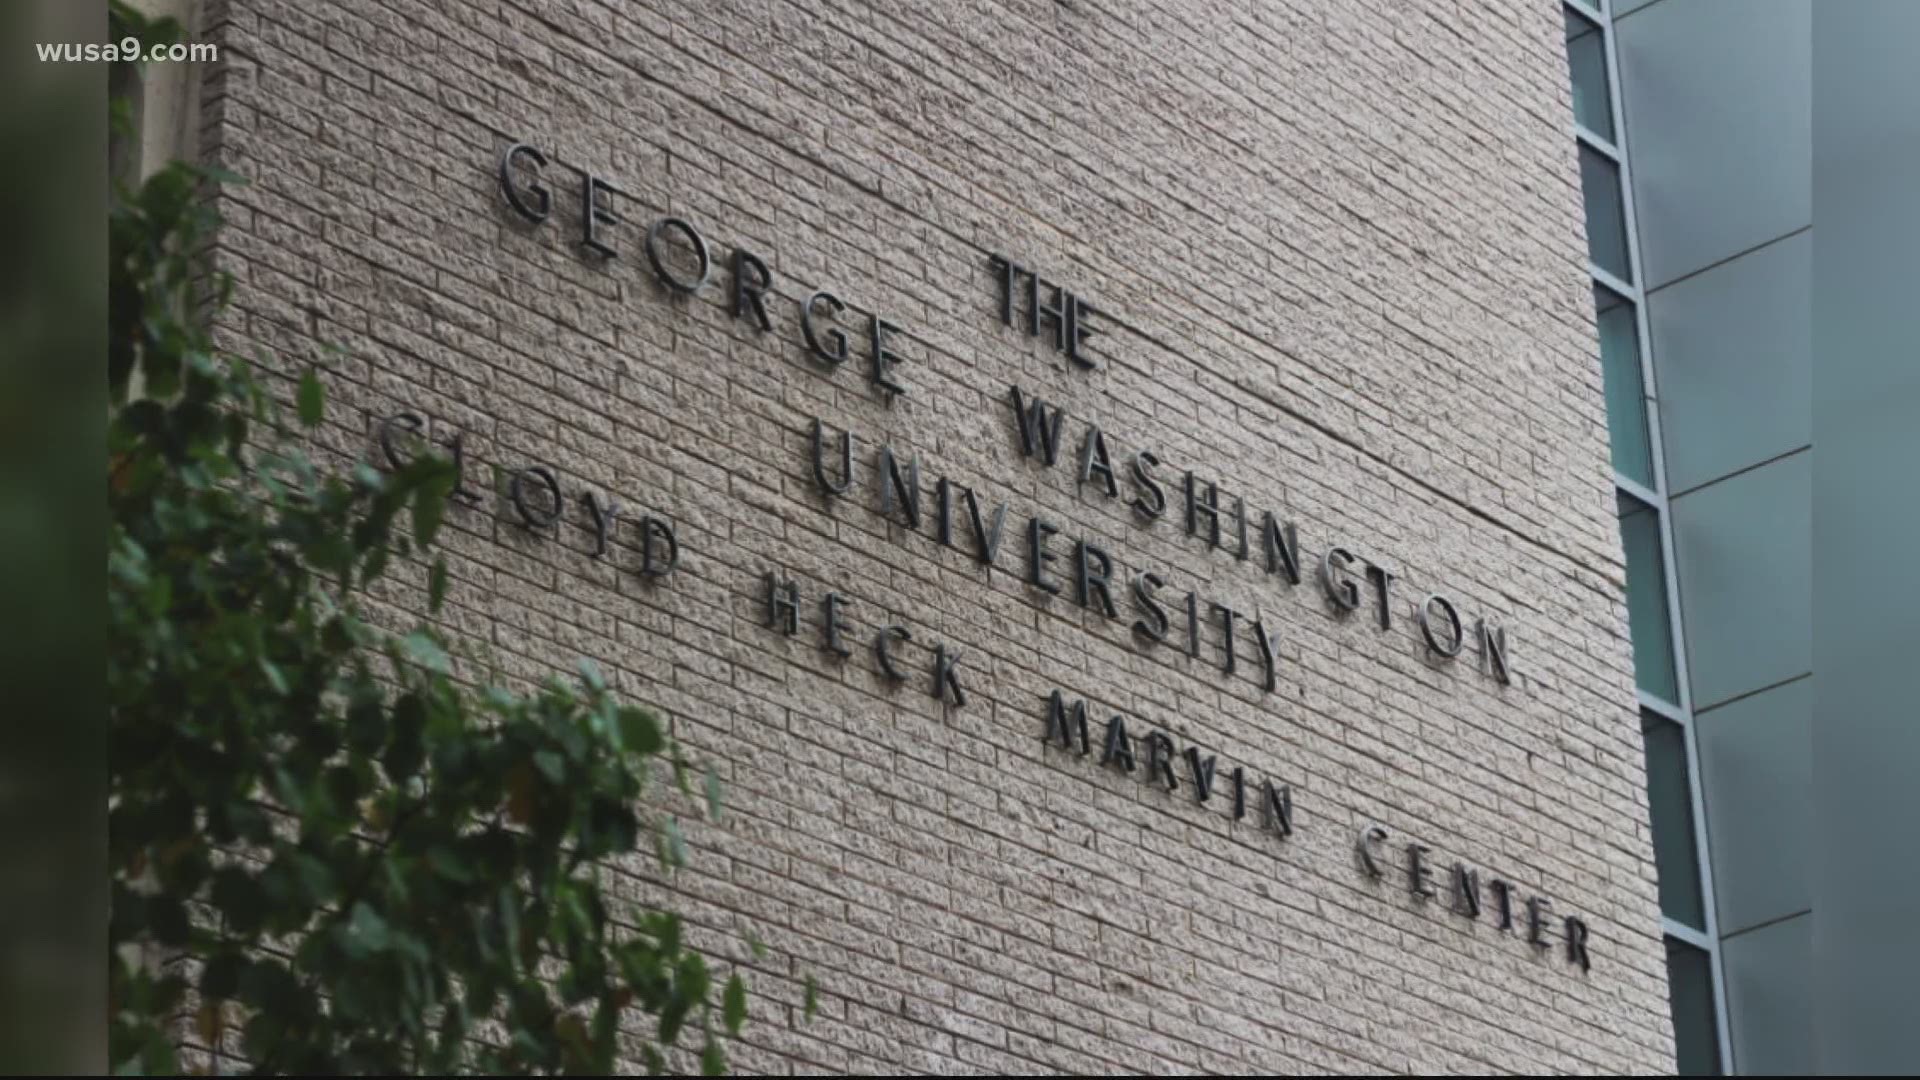 The University announced the name change Tuesday. This is a good thing.